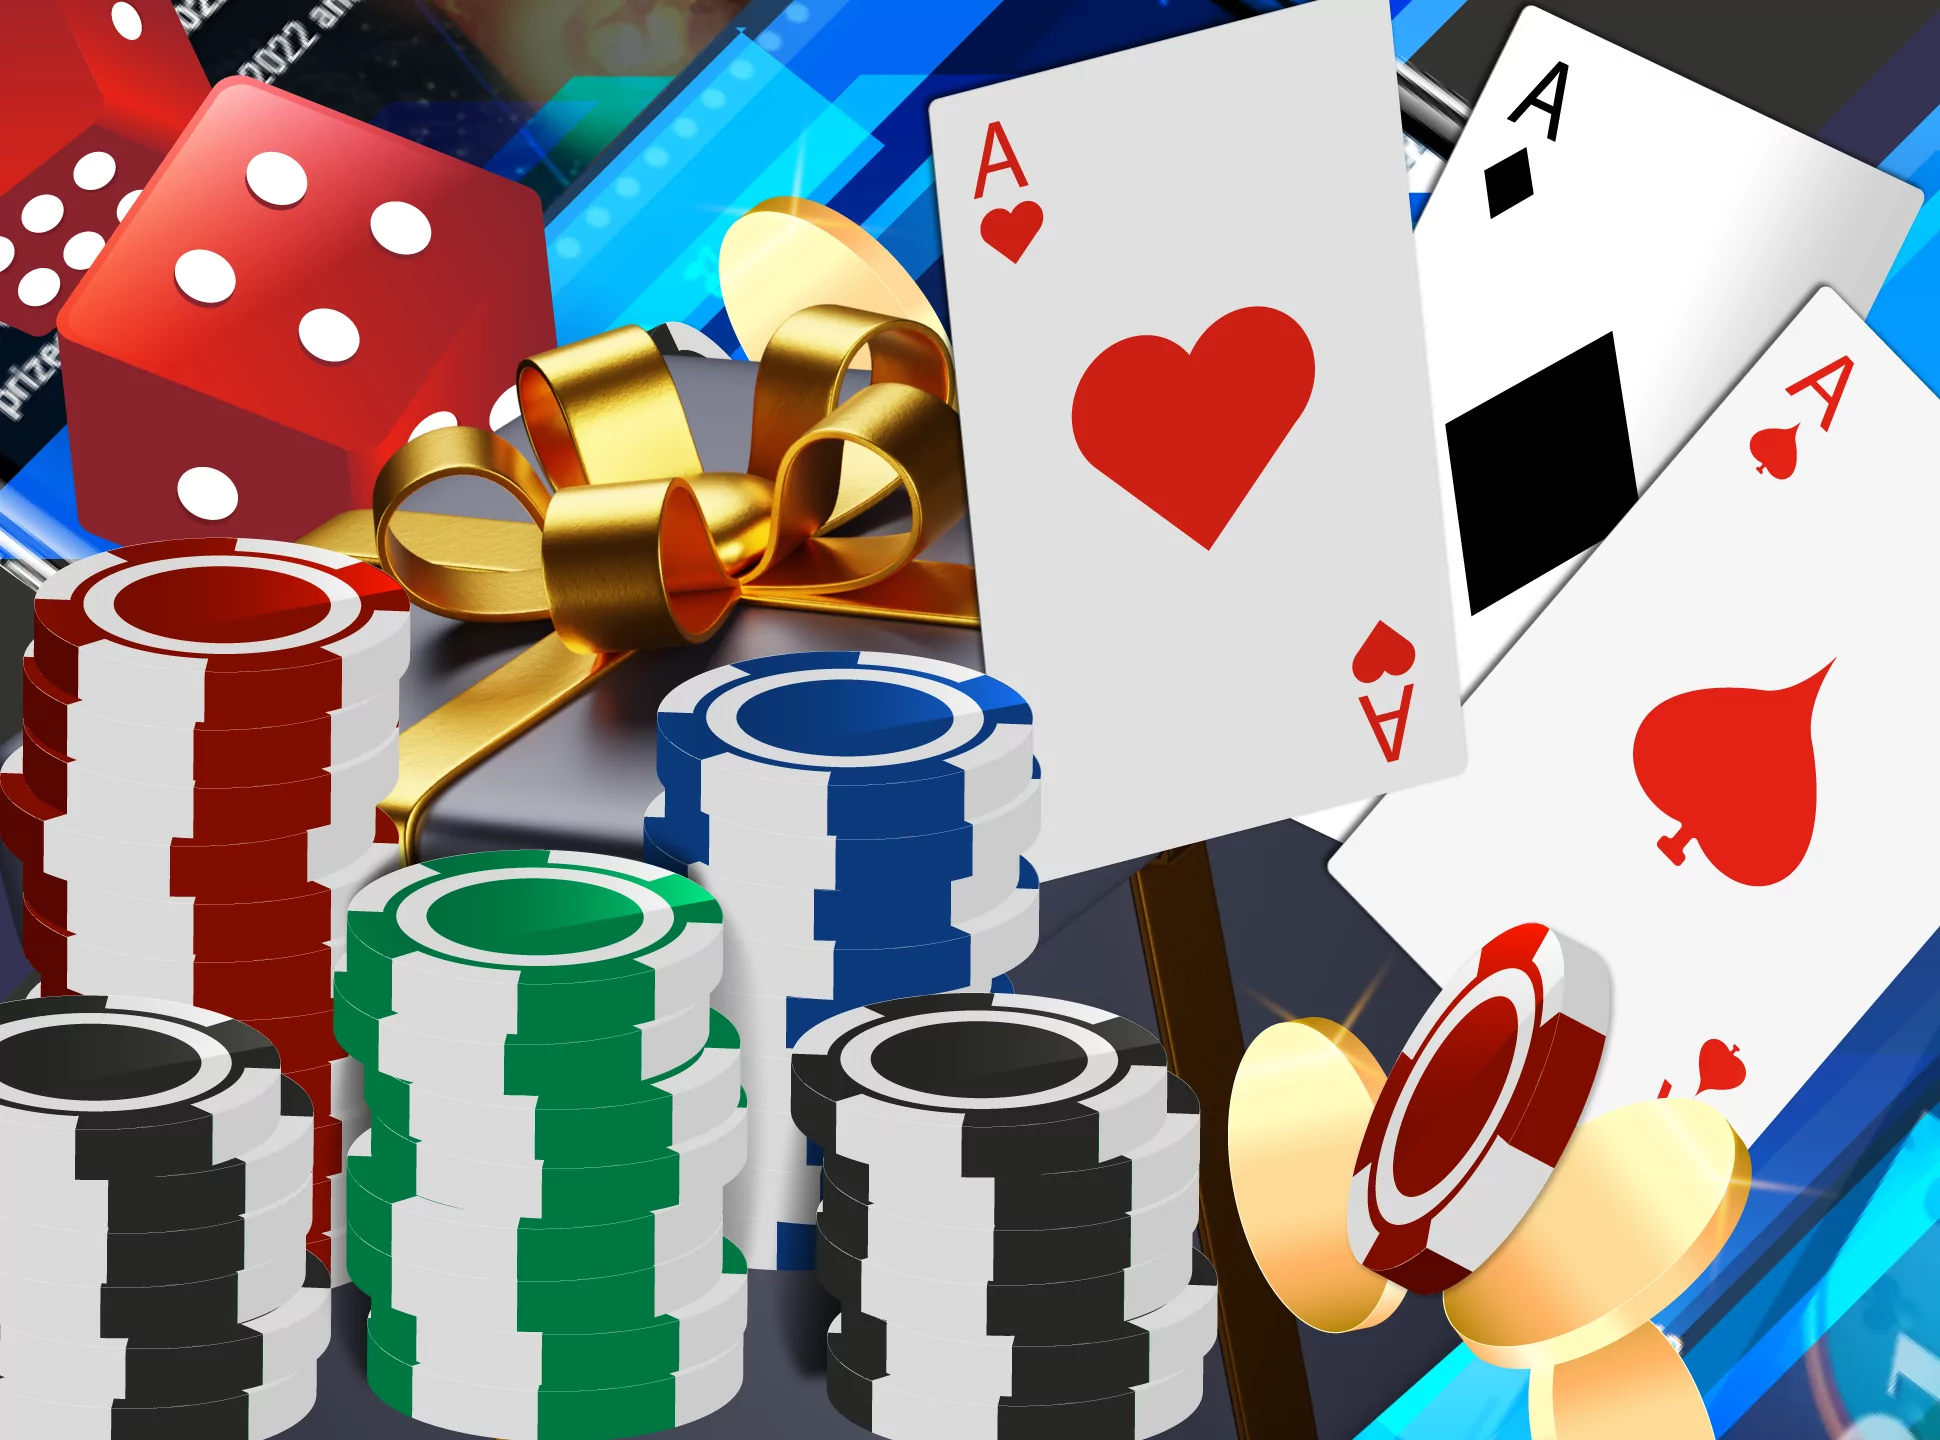 All the casino lovers can get a bonus of up to 140,000 BDT.